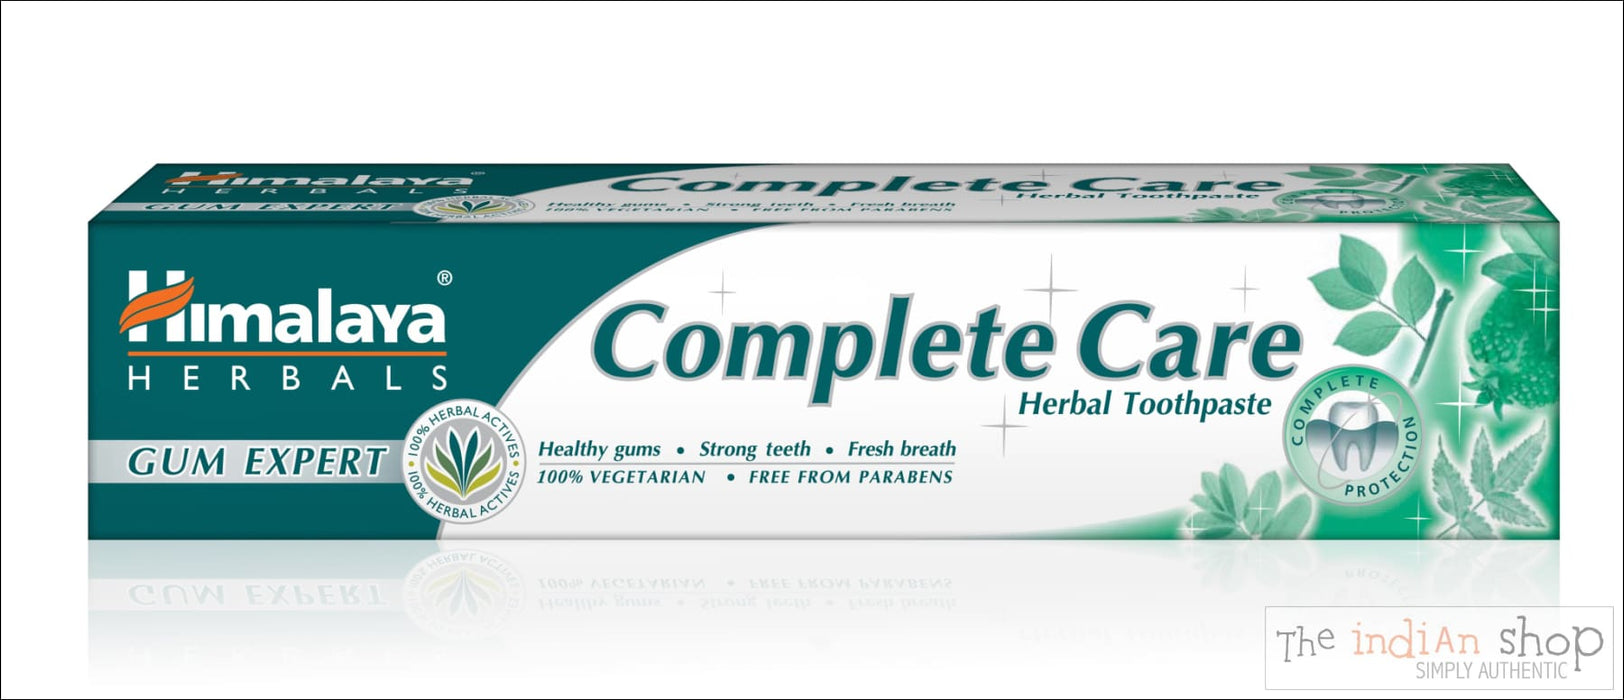 Himalaya Complete Care Herbals Toothpaste - Beauty and Health